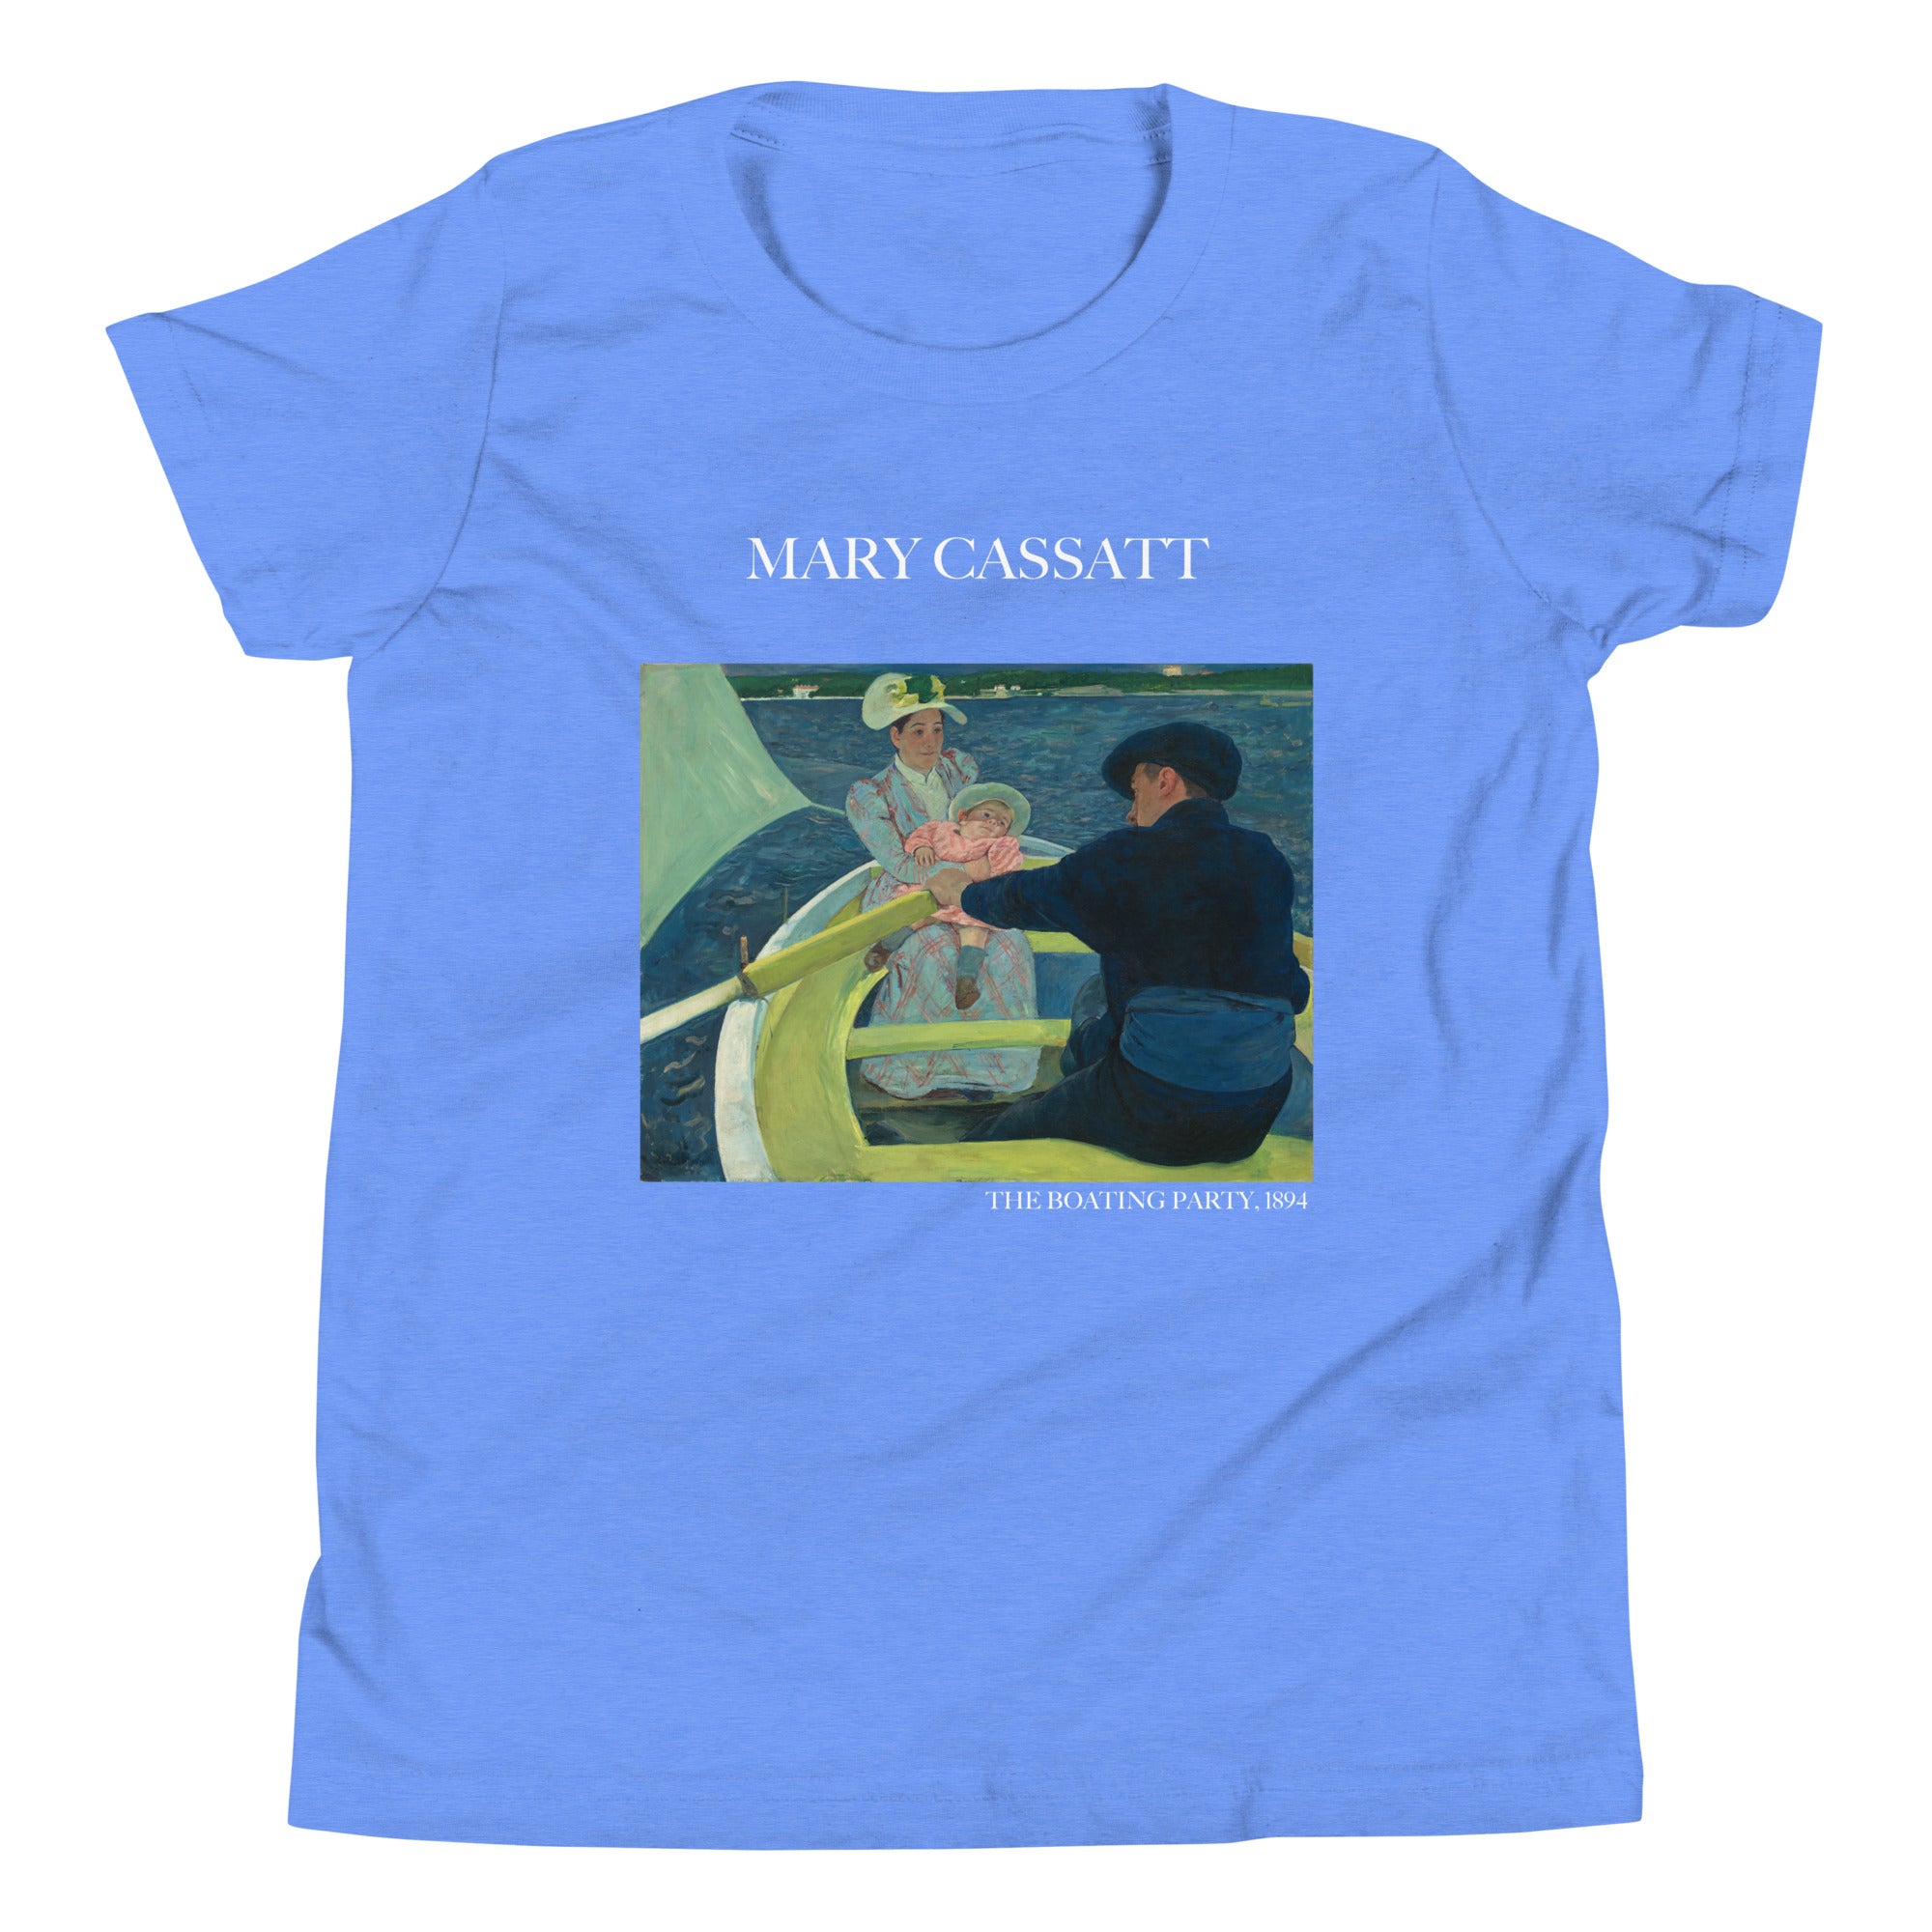 Mary Cassatt 'The Boating Party' Famous Painting Short Sleeve T-Shirt | Premium Youth Art Tee